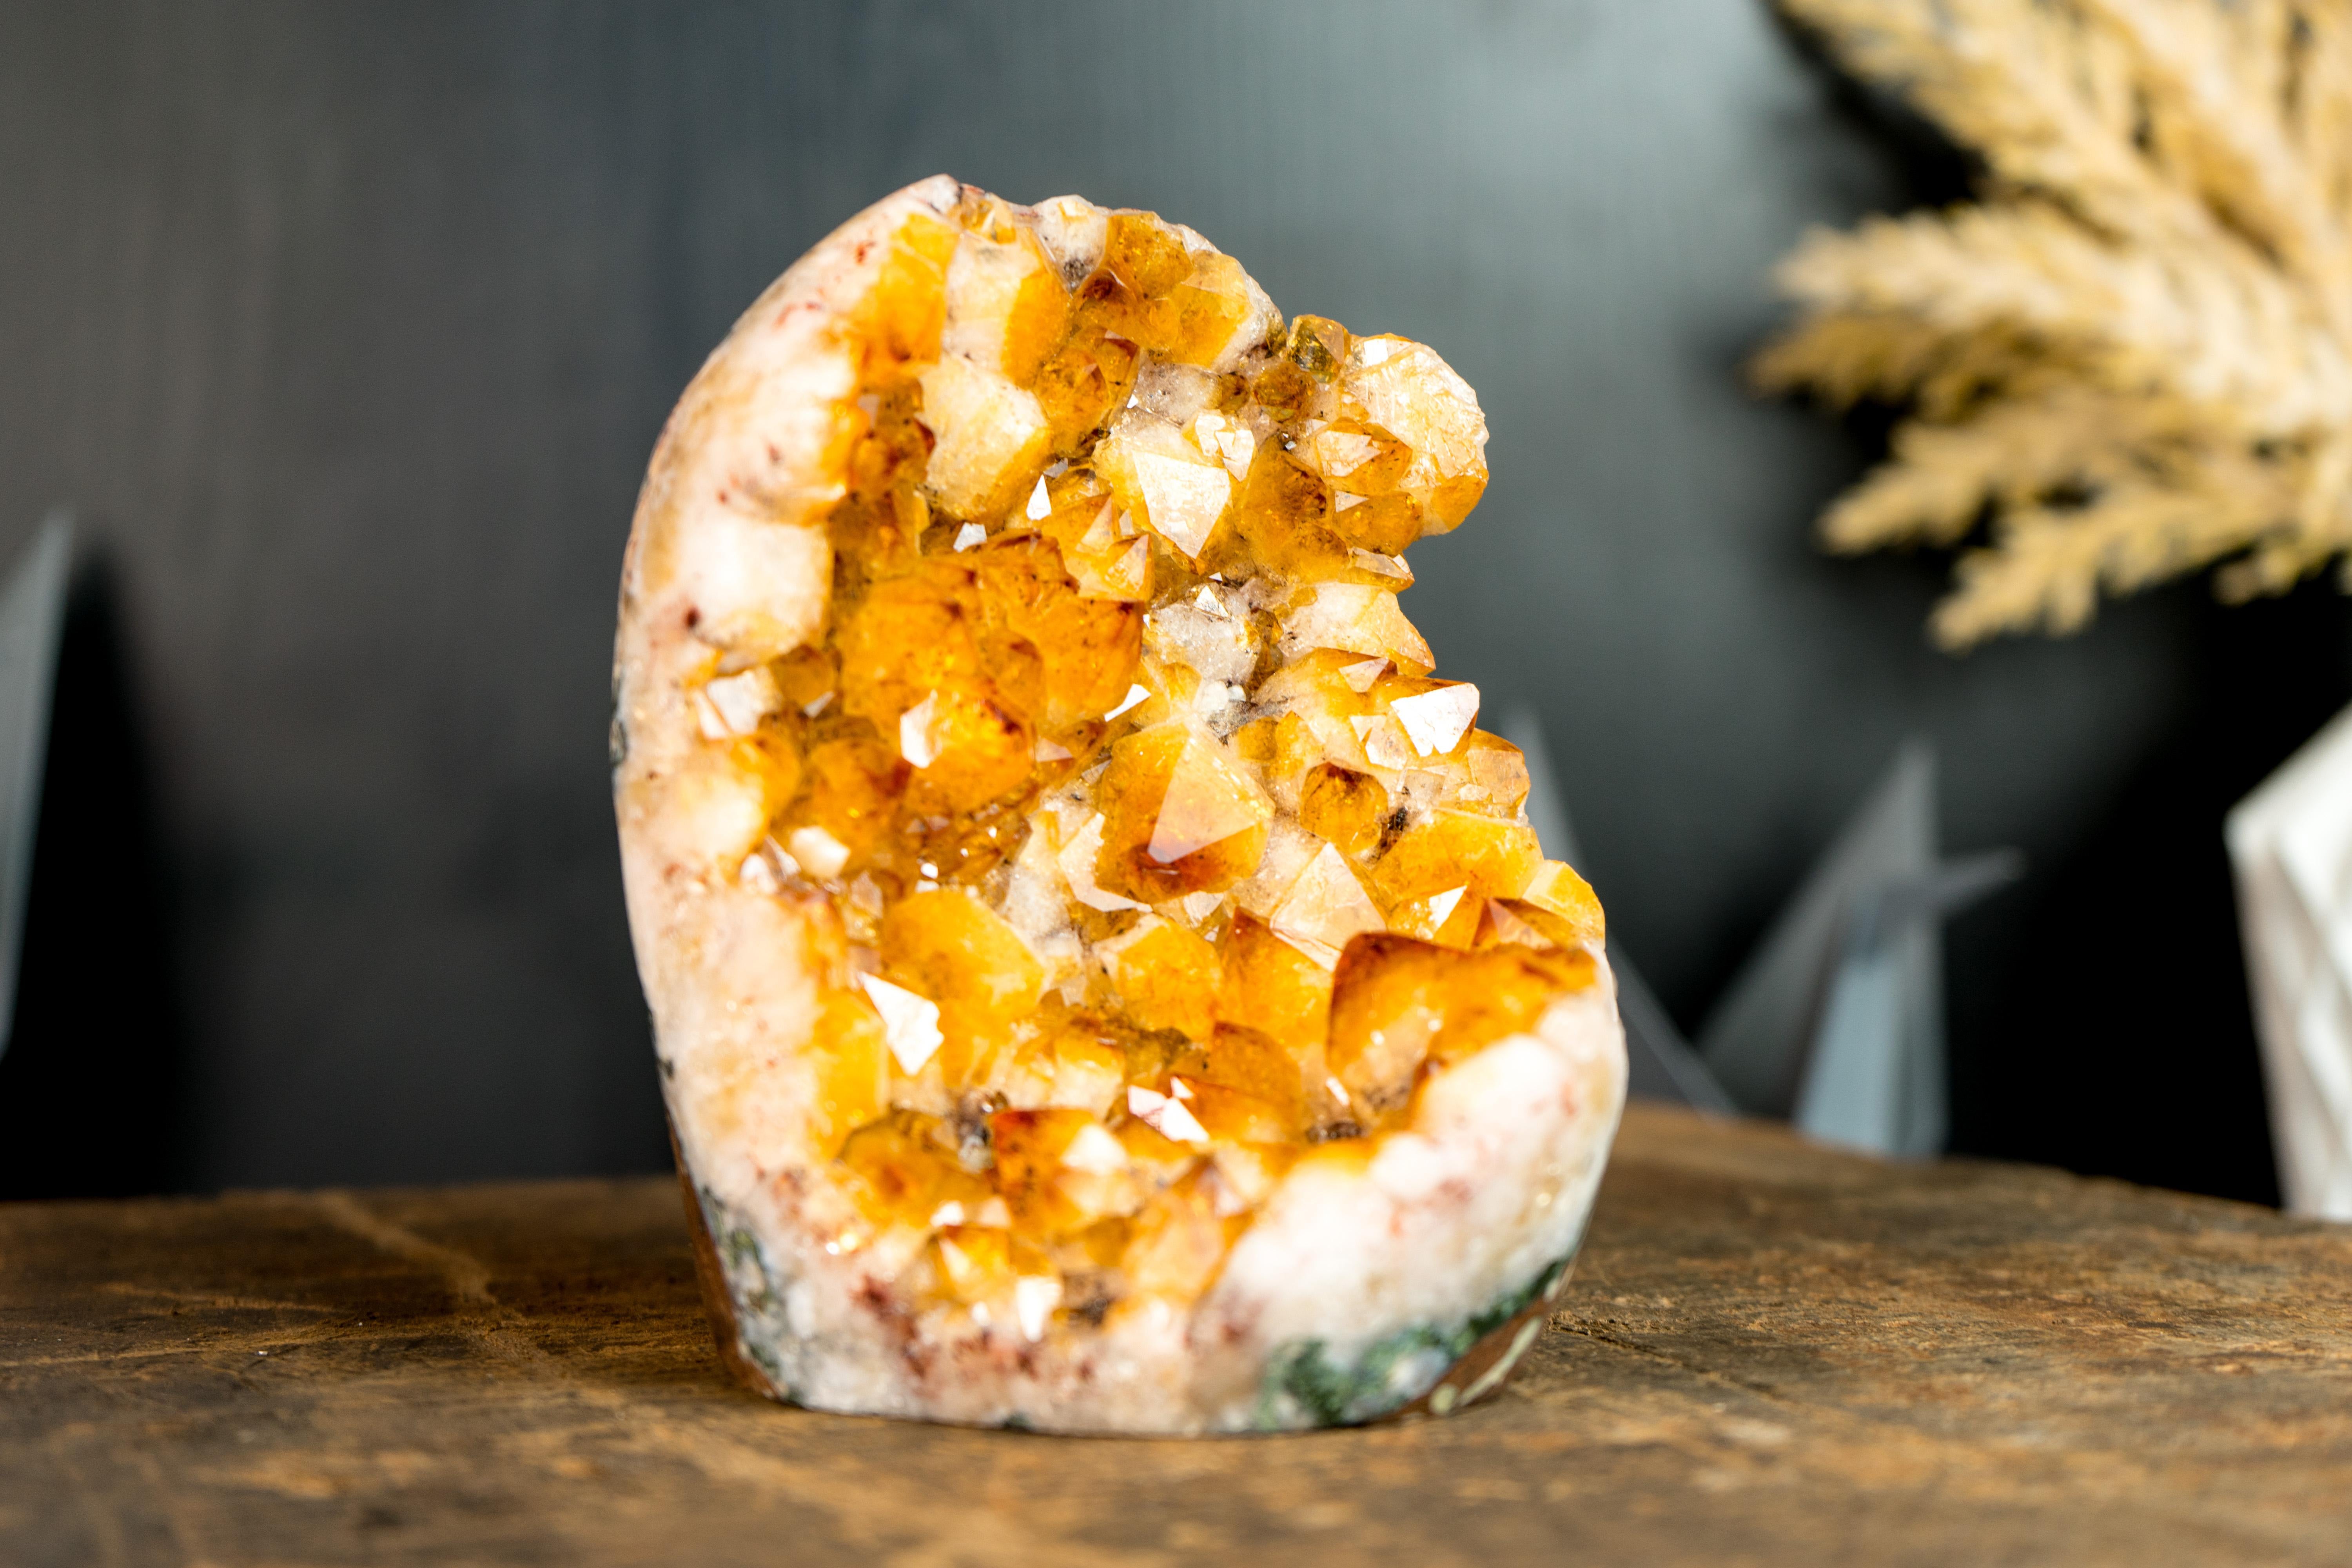 Brazilian Small High-Grade Citrine Cluster with Flower Formations and Orange Citrine Druzy For Sale